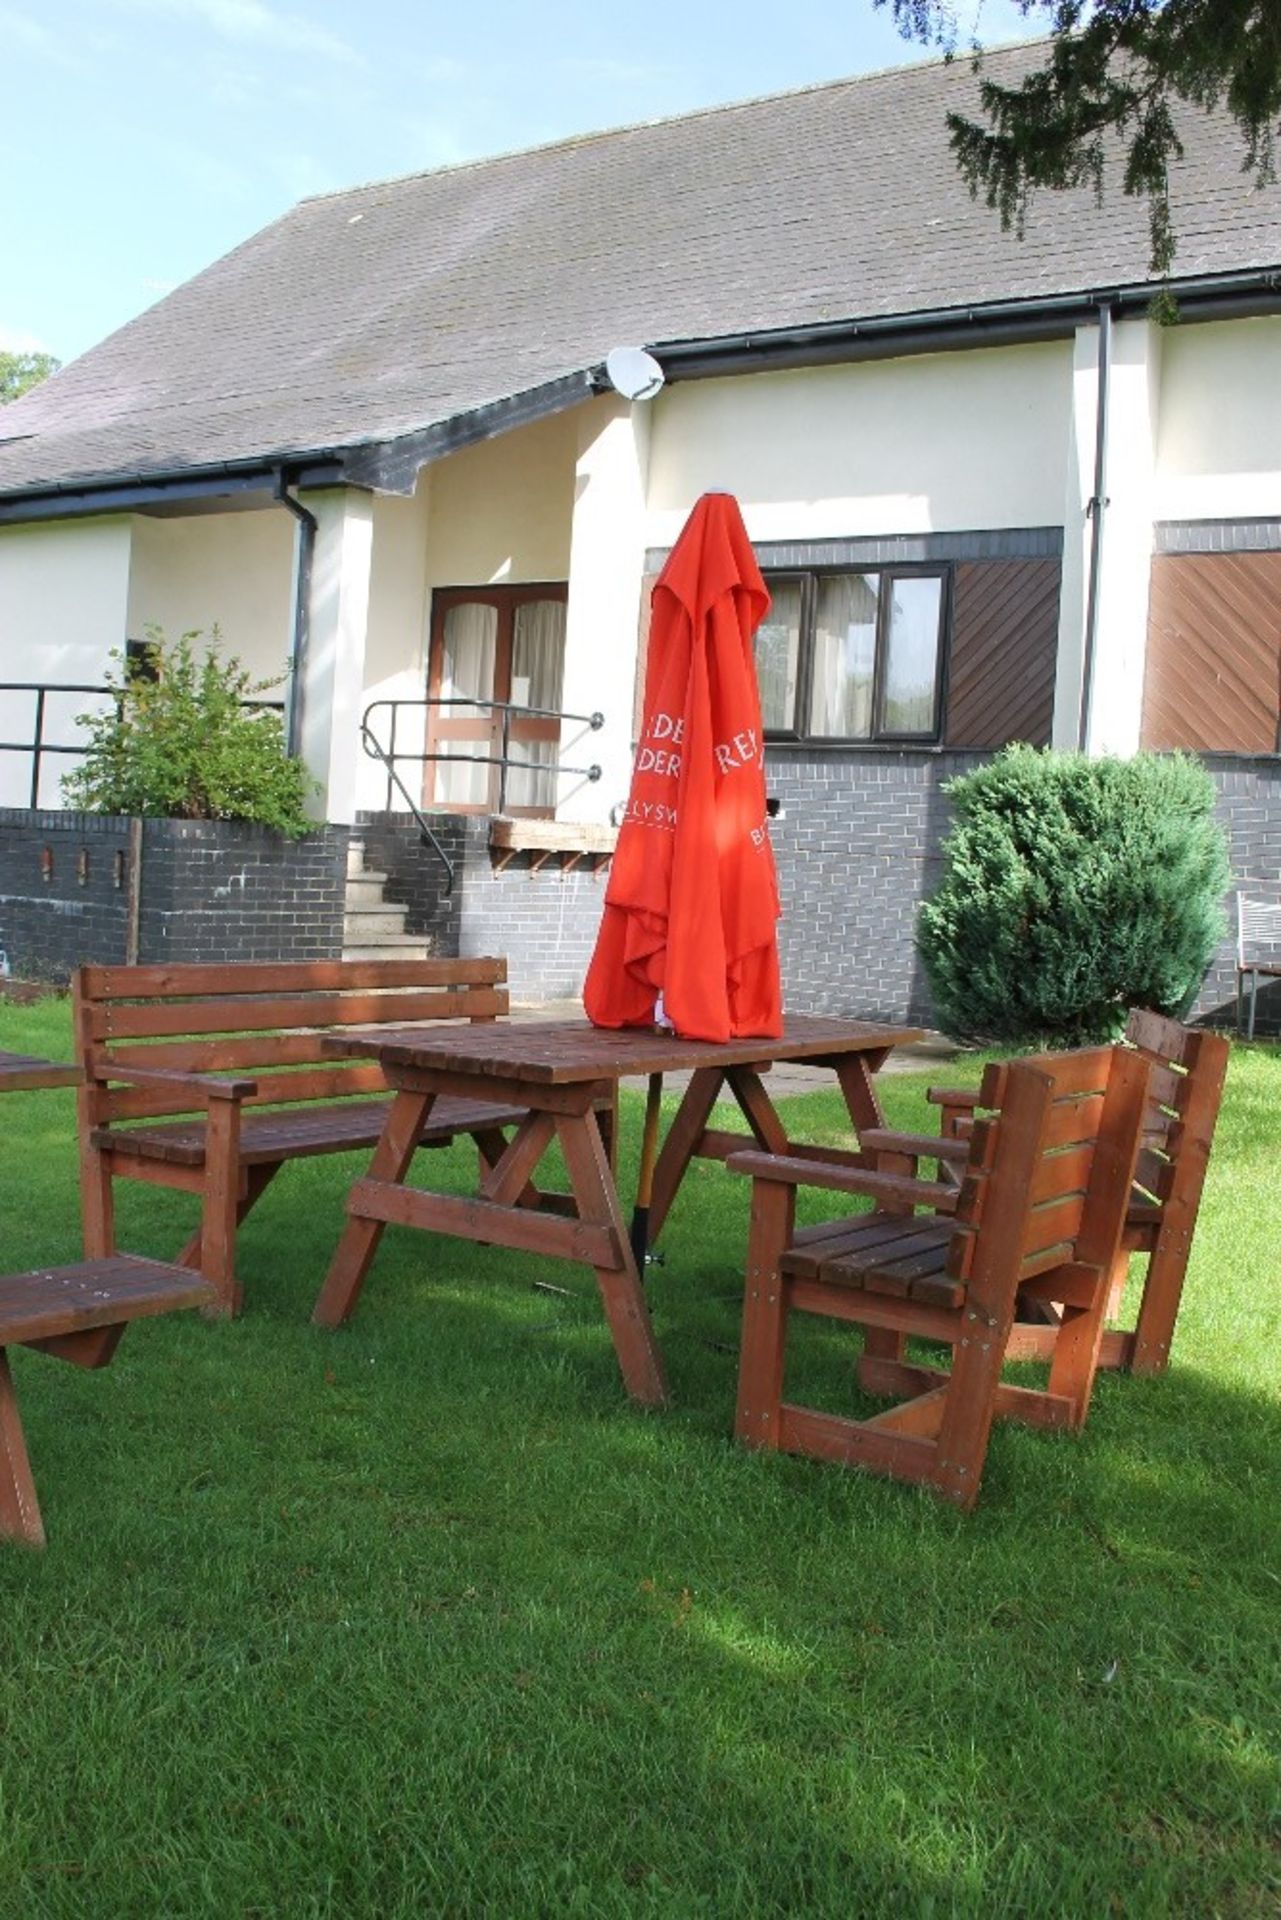 Beer Garden Furniture – Natural Wood – 6 Seater Bench, Table + 2 Chairs + Parasol - Buyer to collect